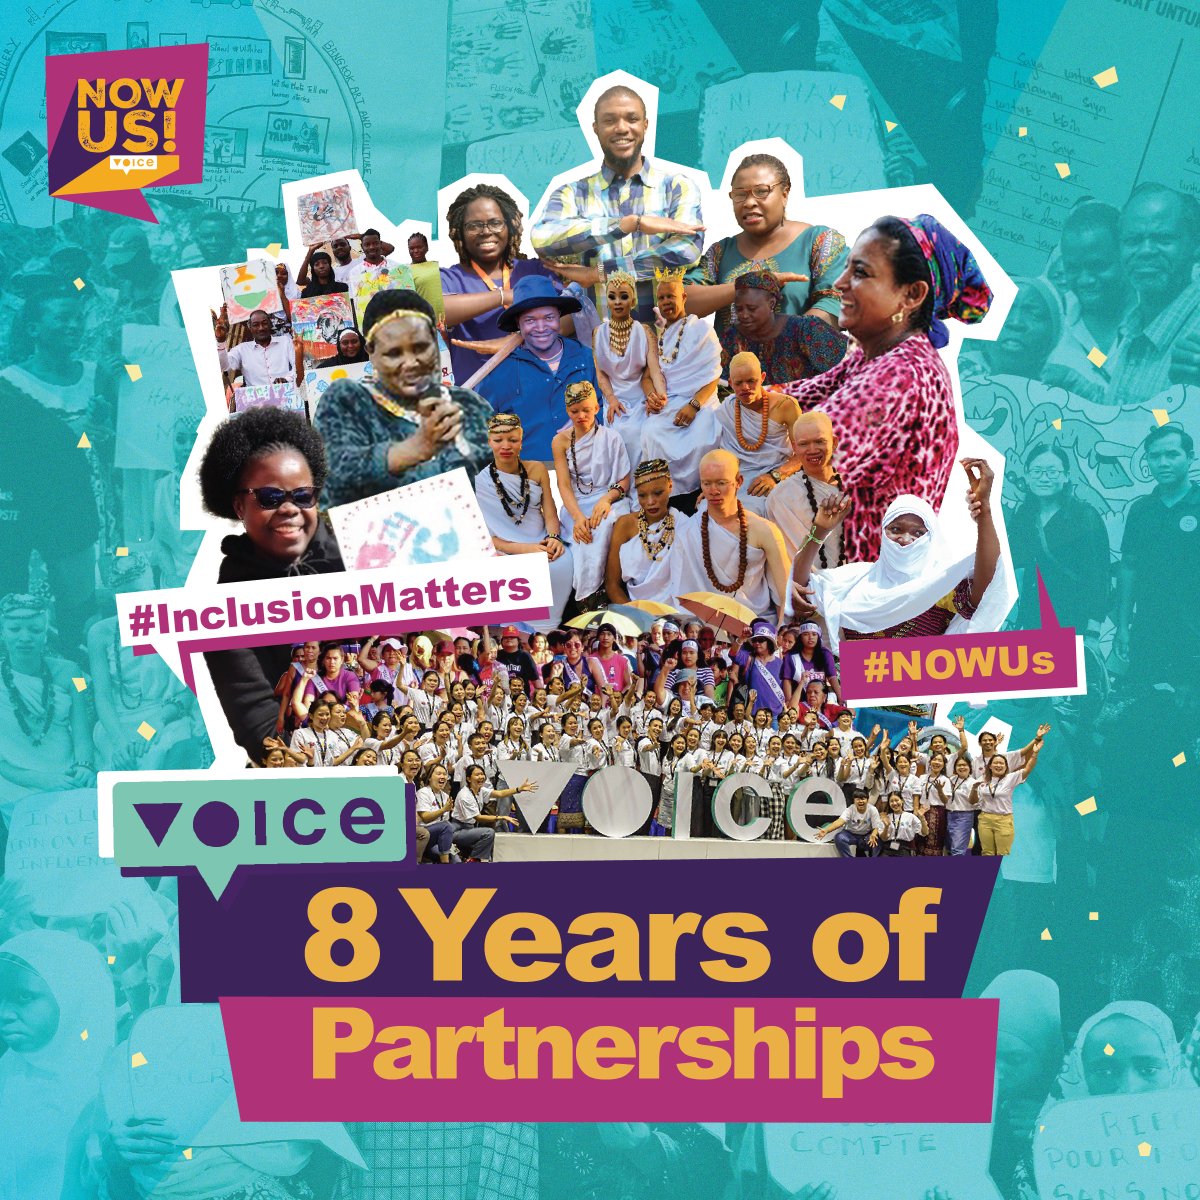 8 Years Strong! 💪 Today, Voice celebrates our 8th anniversary!🎉 Fostering inclusive communities and driving positive change worldwide. Grateful for our partners & community's dedication! 🙏 Here's to more years of amplifying voices and creating lasting change together!🥳